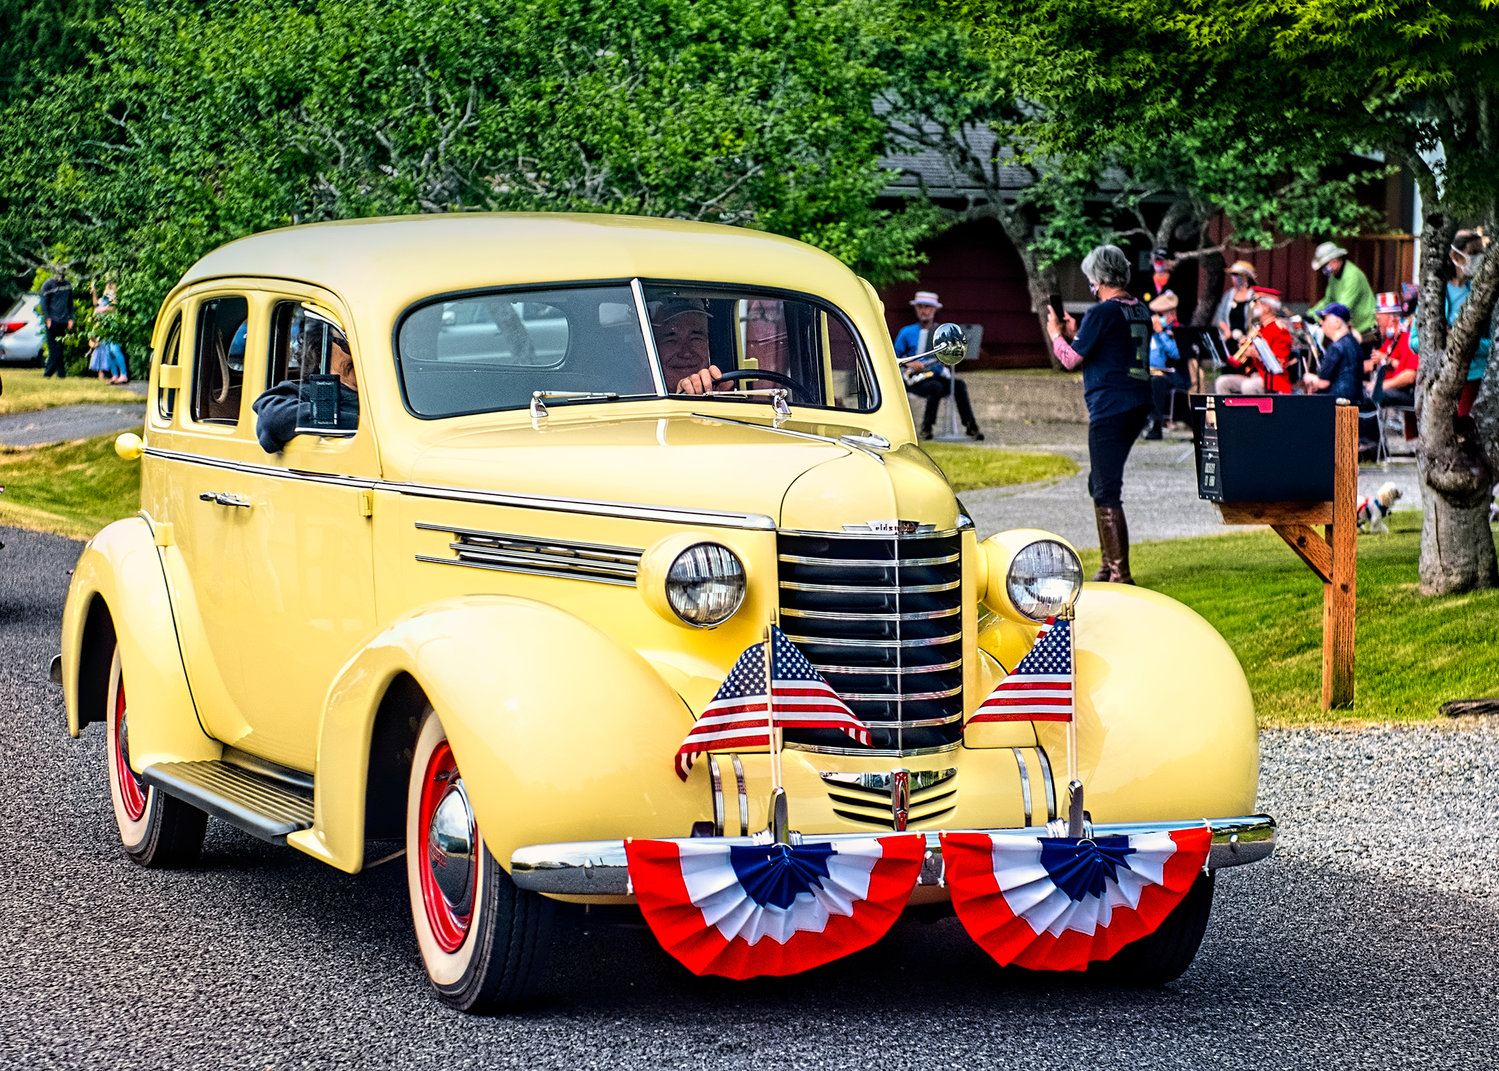 A gorgeous roadster tours the Fourth of July parade route in Home.